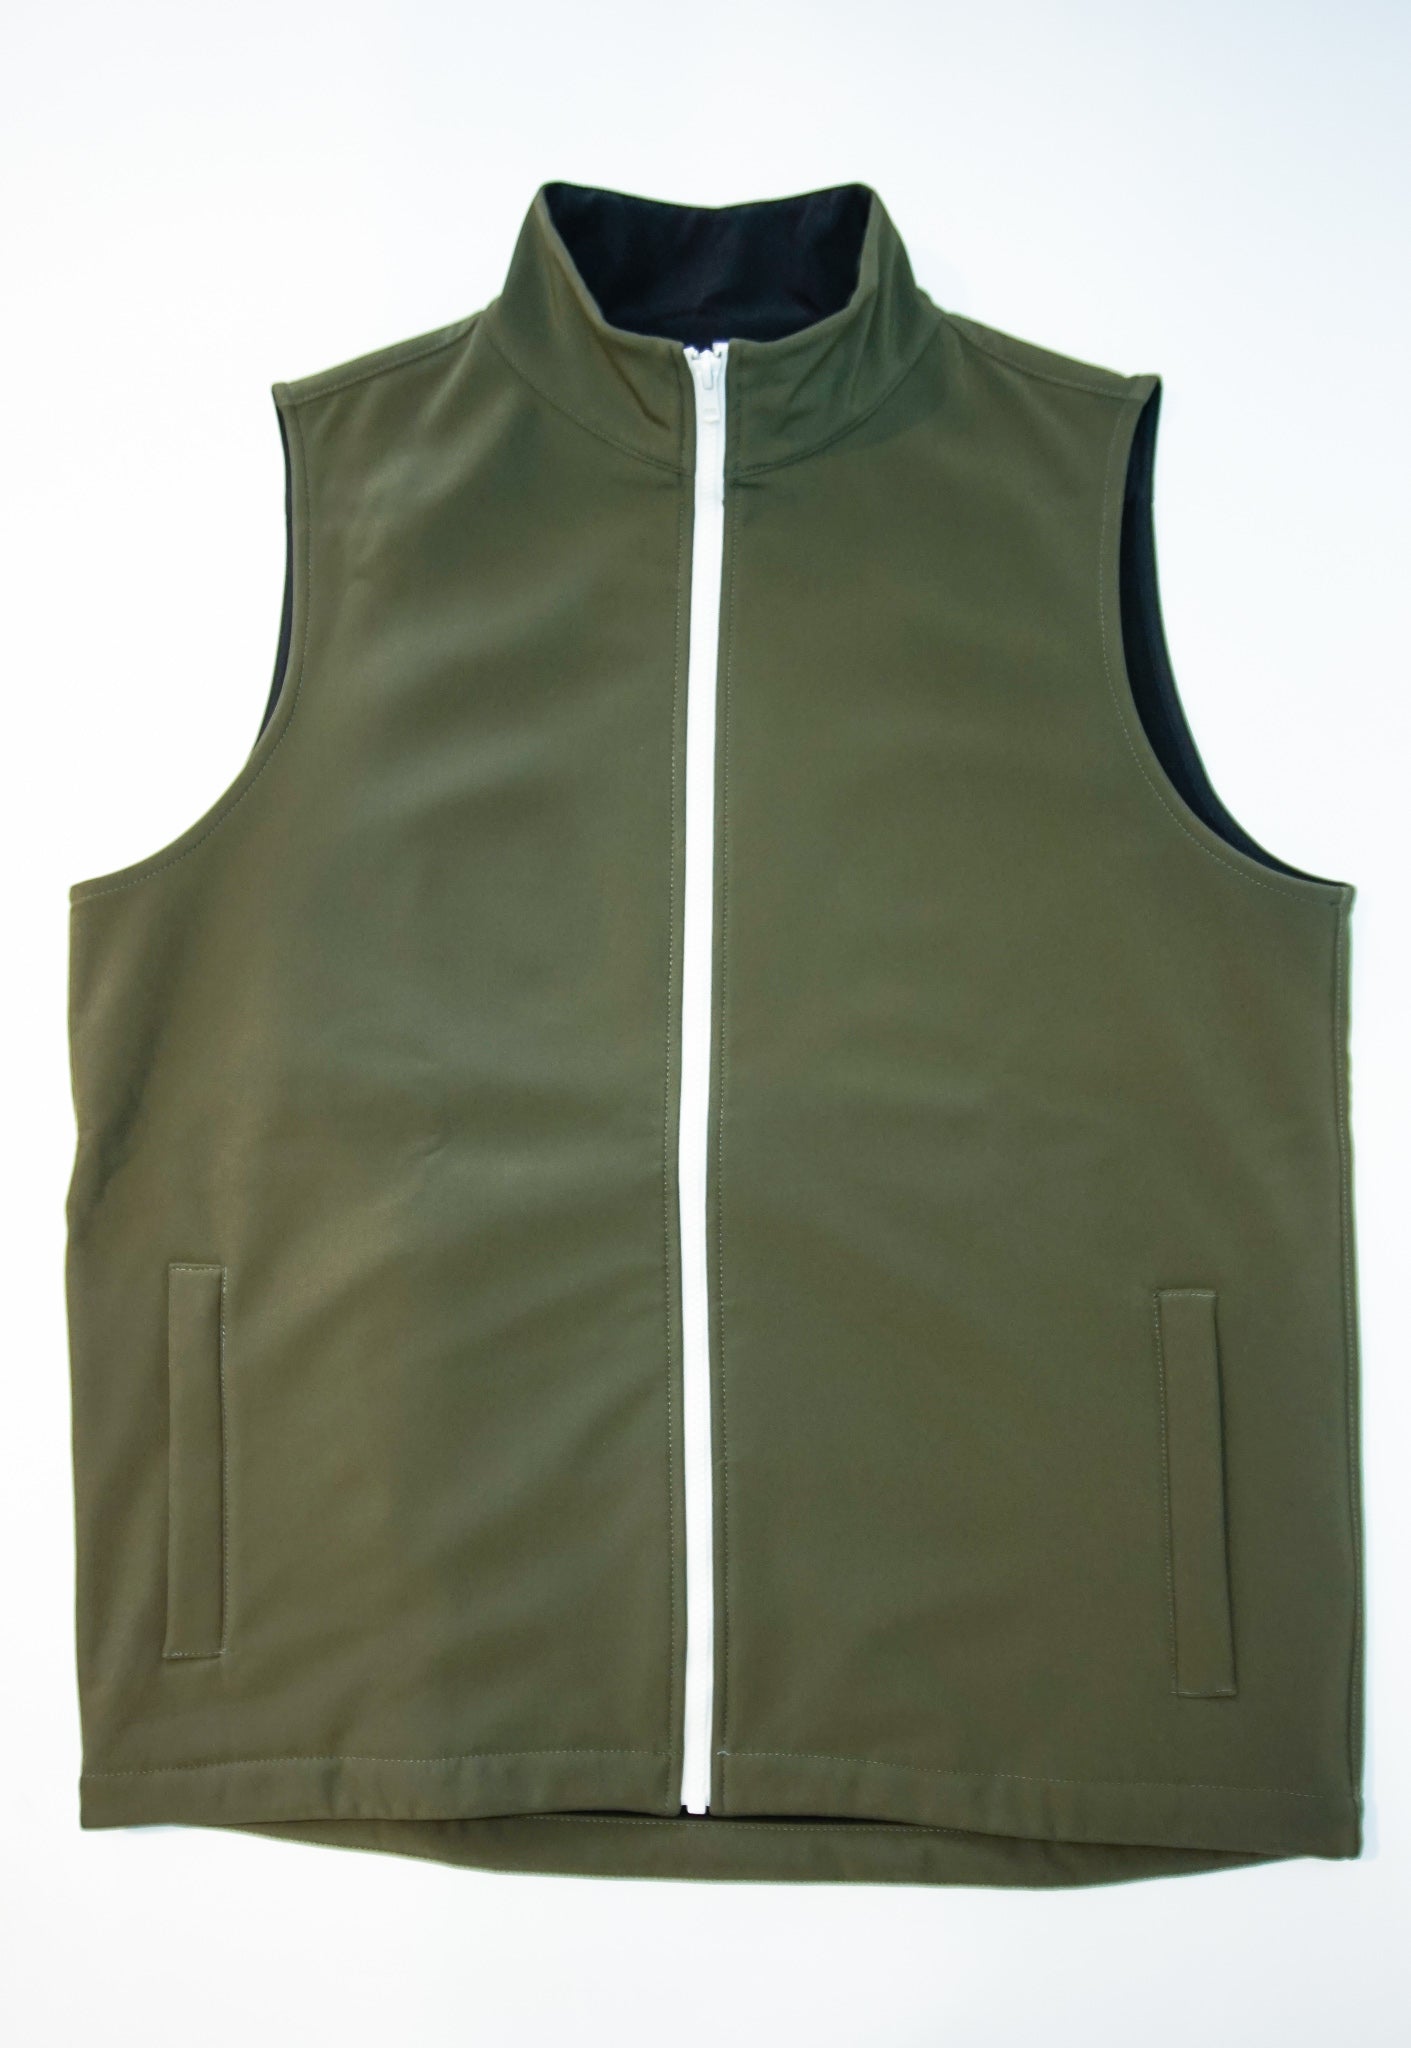 The Player's Vest